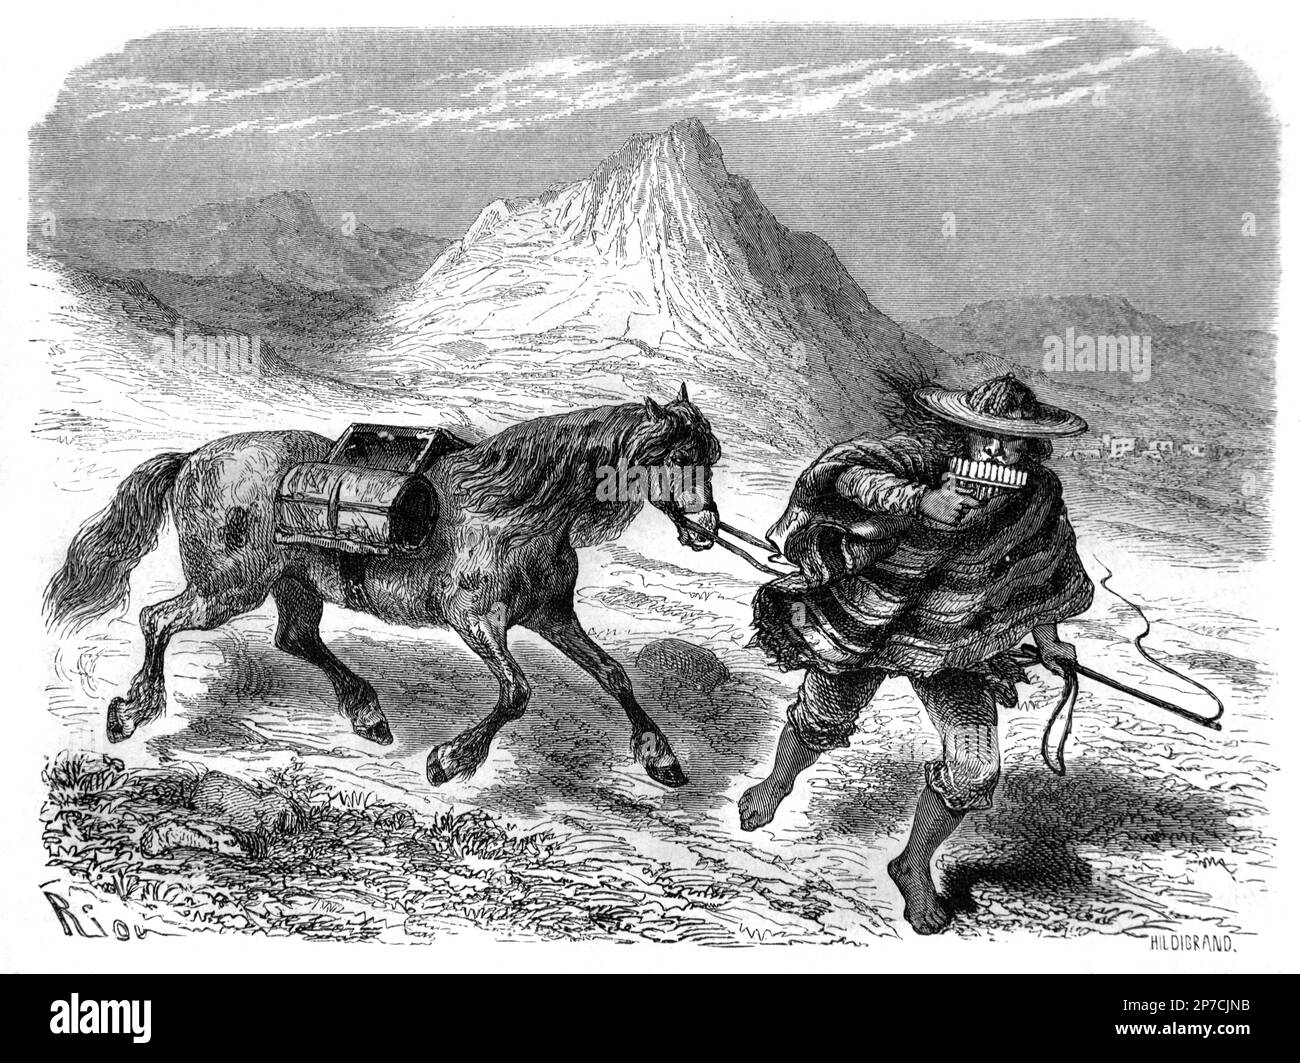 Peruvian Pony Post, Post Rider, Postrider, Mail, Mailman or Postman. Post Delivery by Native Quechua Man, Indigenoous People of South America, particularly Peru and Bolivia. Vintage or Historic Engraving or Illustration 1862  Peru 1862 Stock Photo